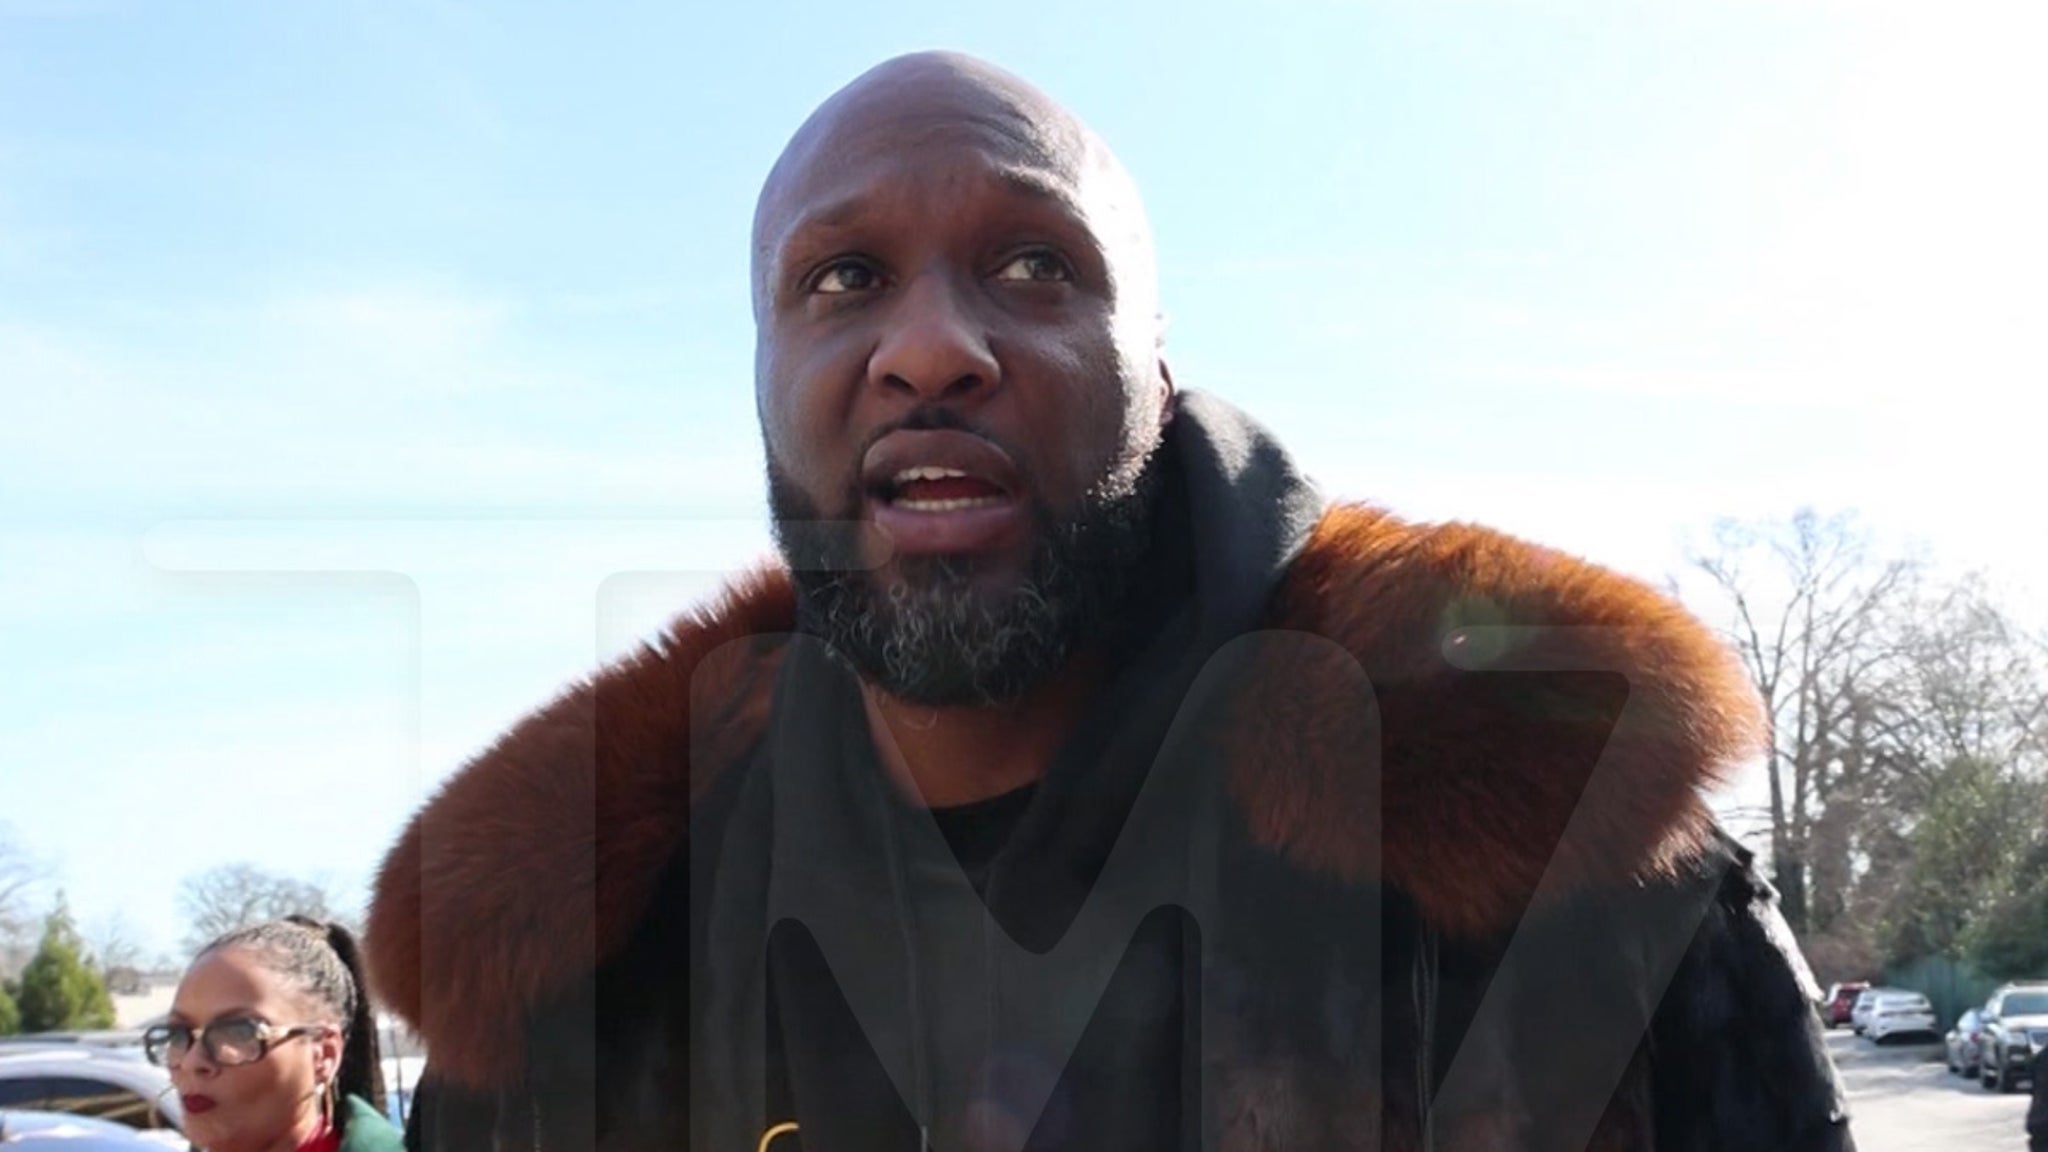 Lamar Odom Calls Tristan Thompson ‘Corny’ for What He Did to Khloe